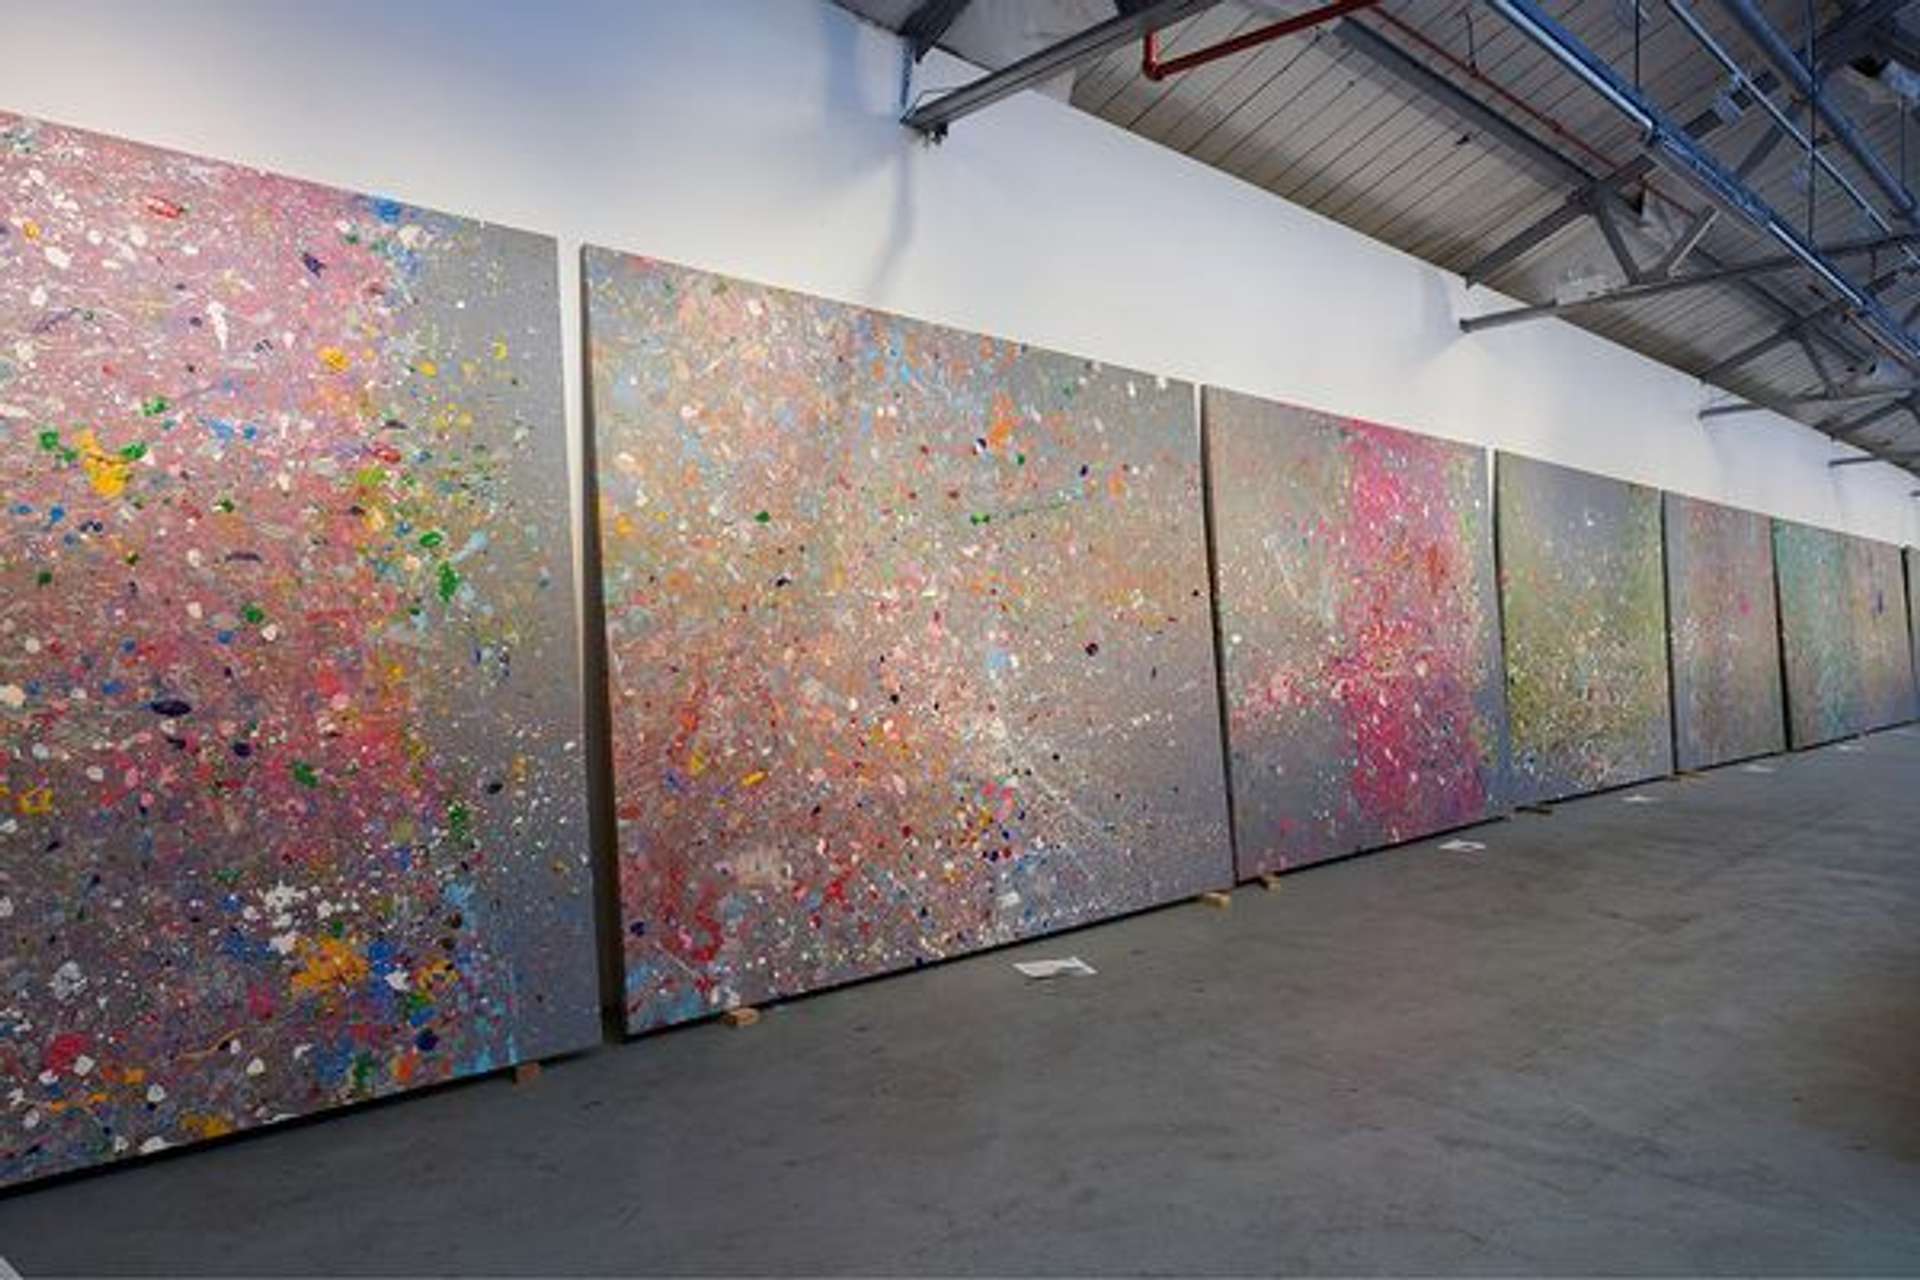 A photograph of Damien Hirst’s studio, with several Coast Paintings on display. These are a series of colourful paint splatters against a grey background.